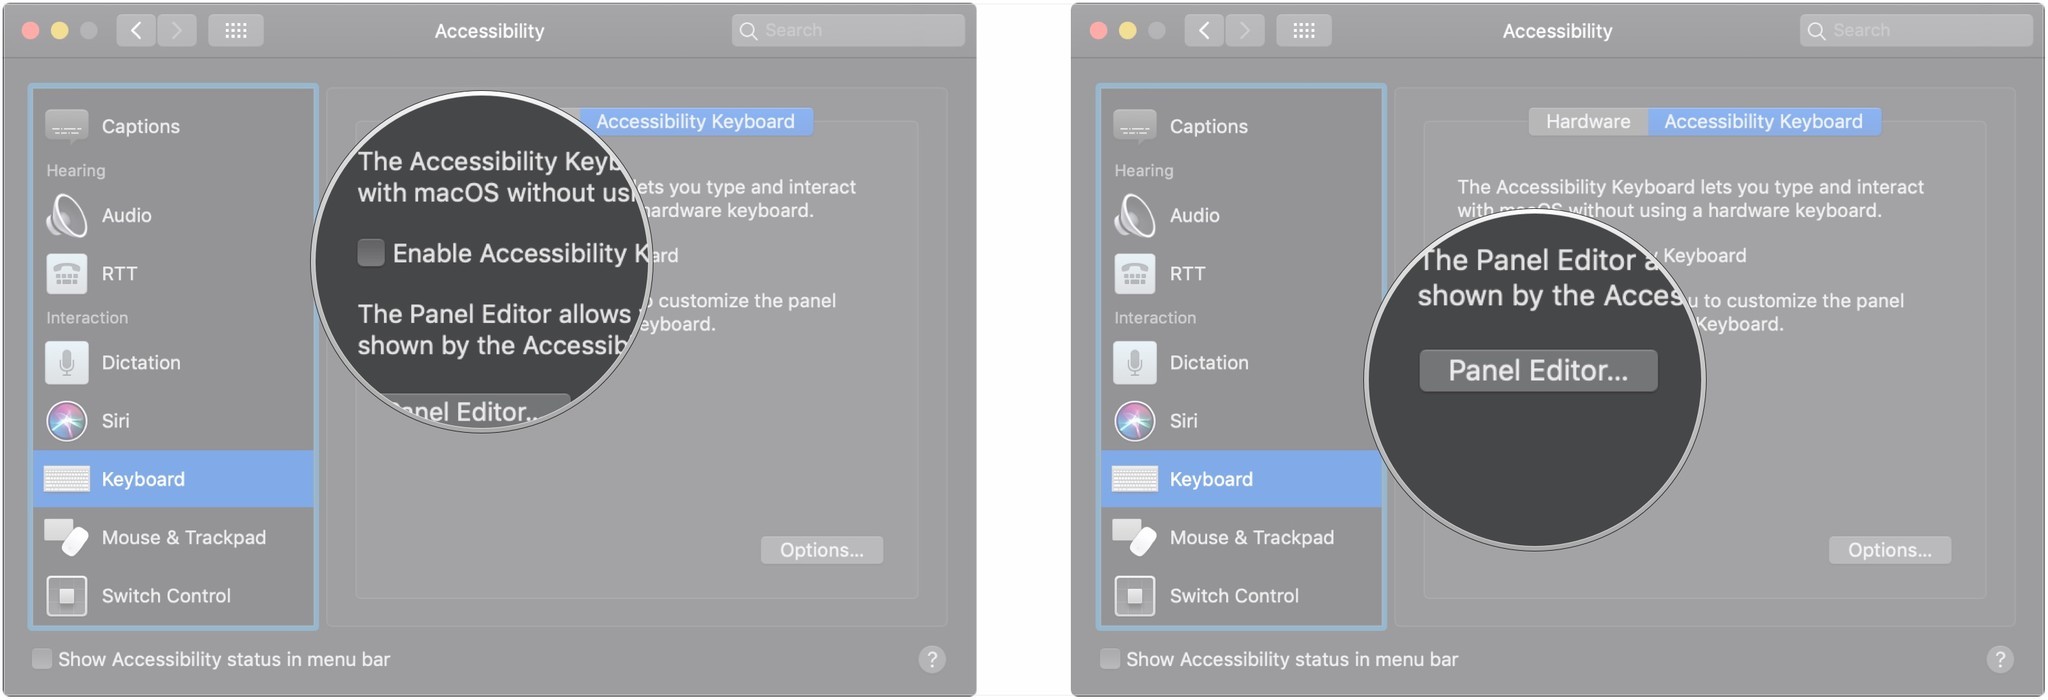 Use Keyboard Accessibility Accessibility Keyboard feature on Mac by showing Enabling Accessibility Keyboard by Clicking the checkbox, click Panel Editor...